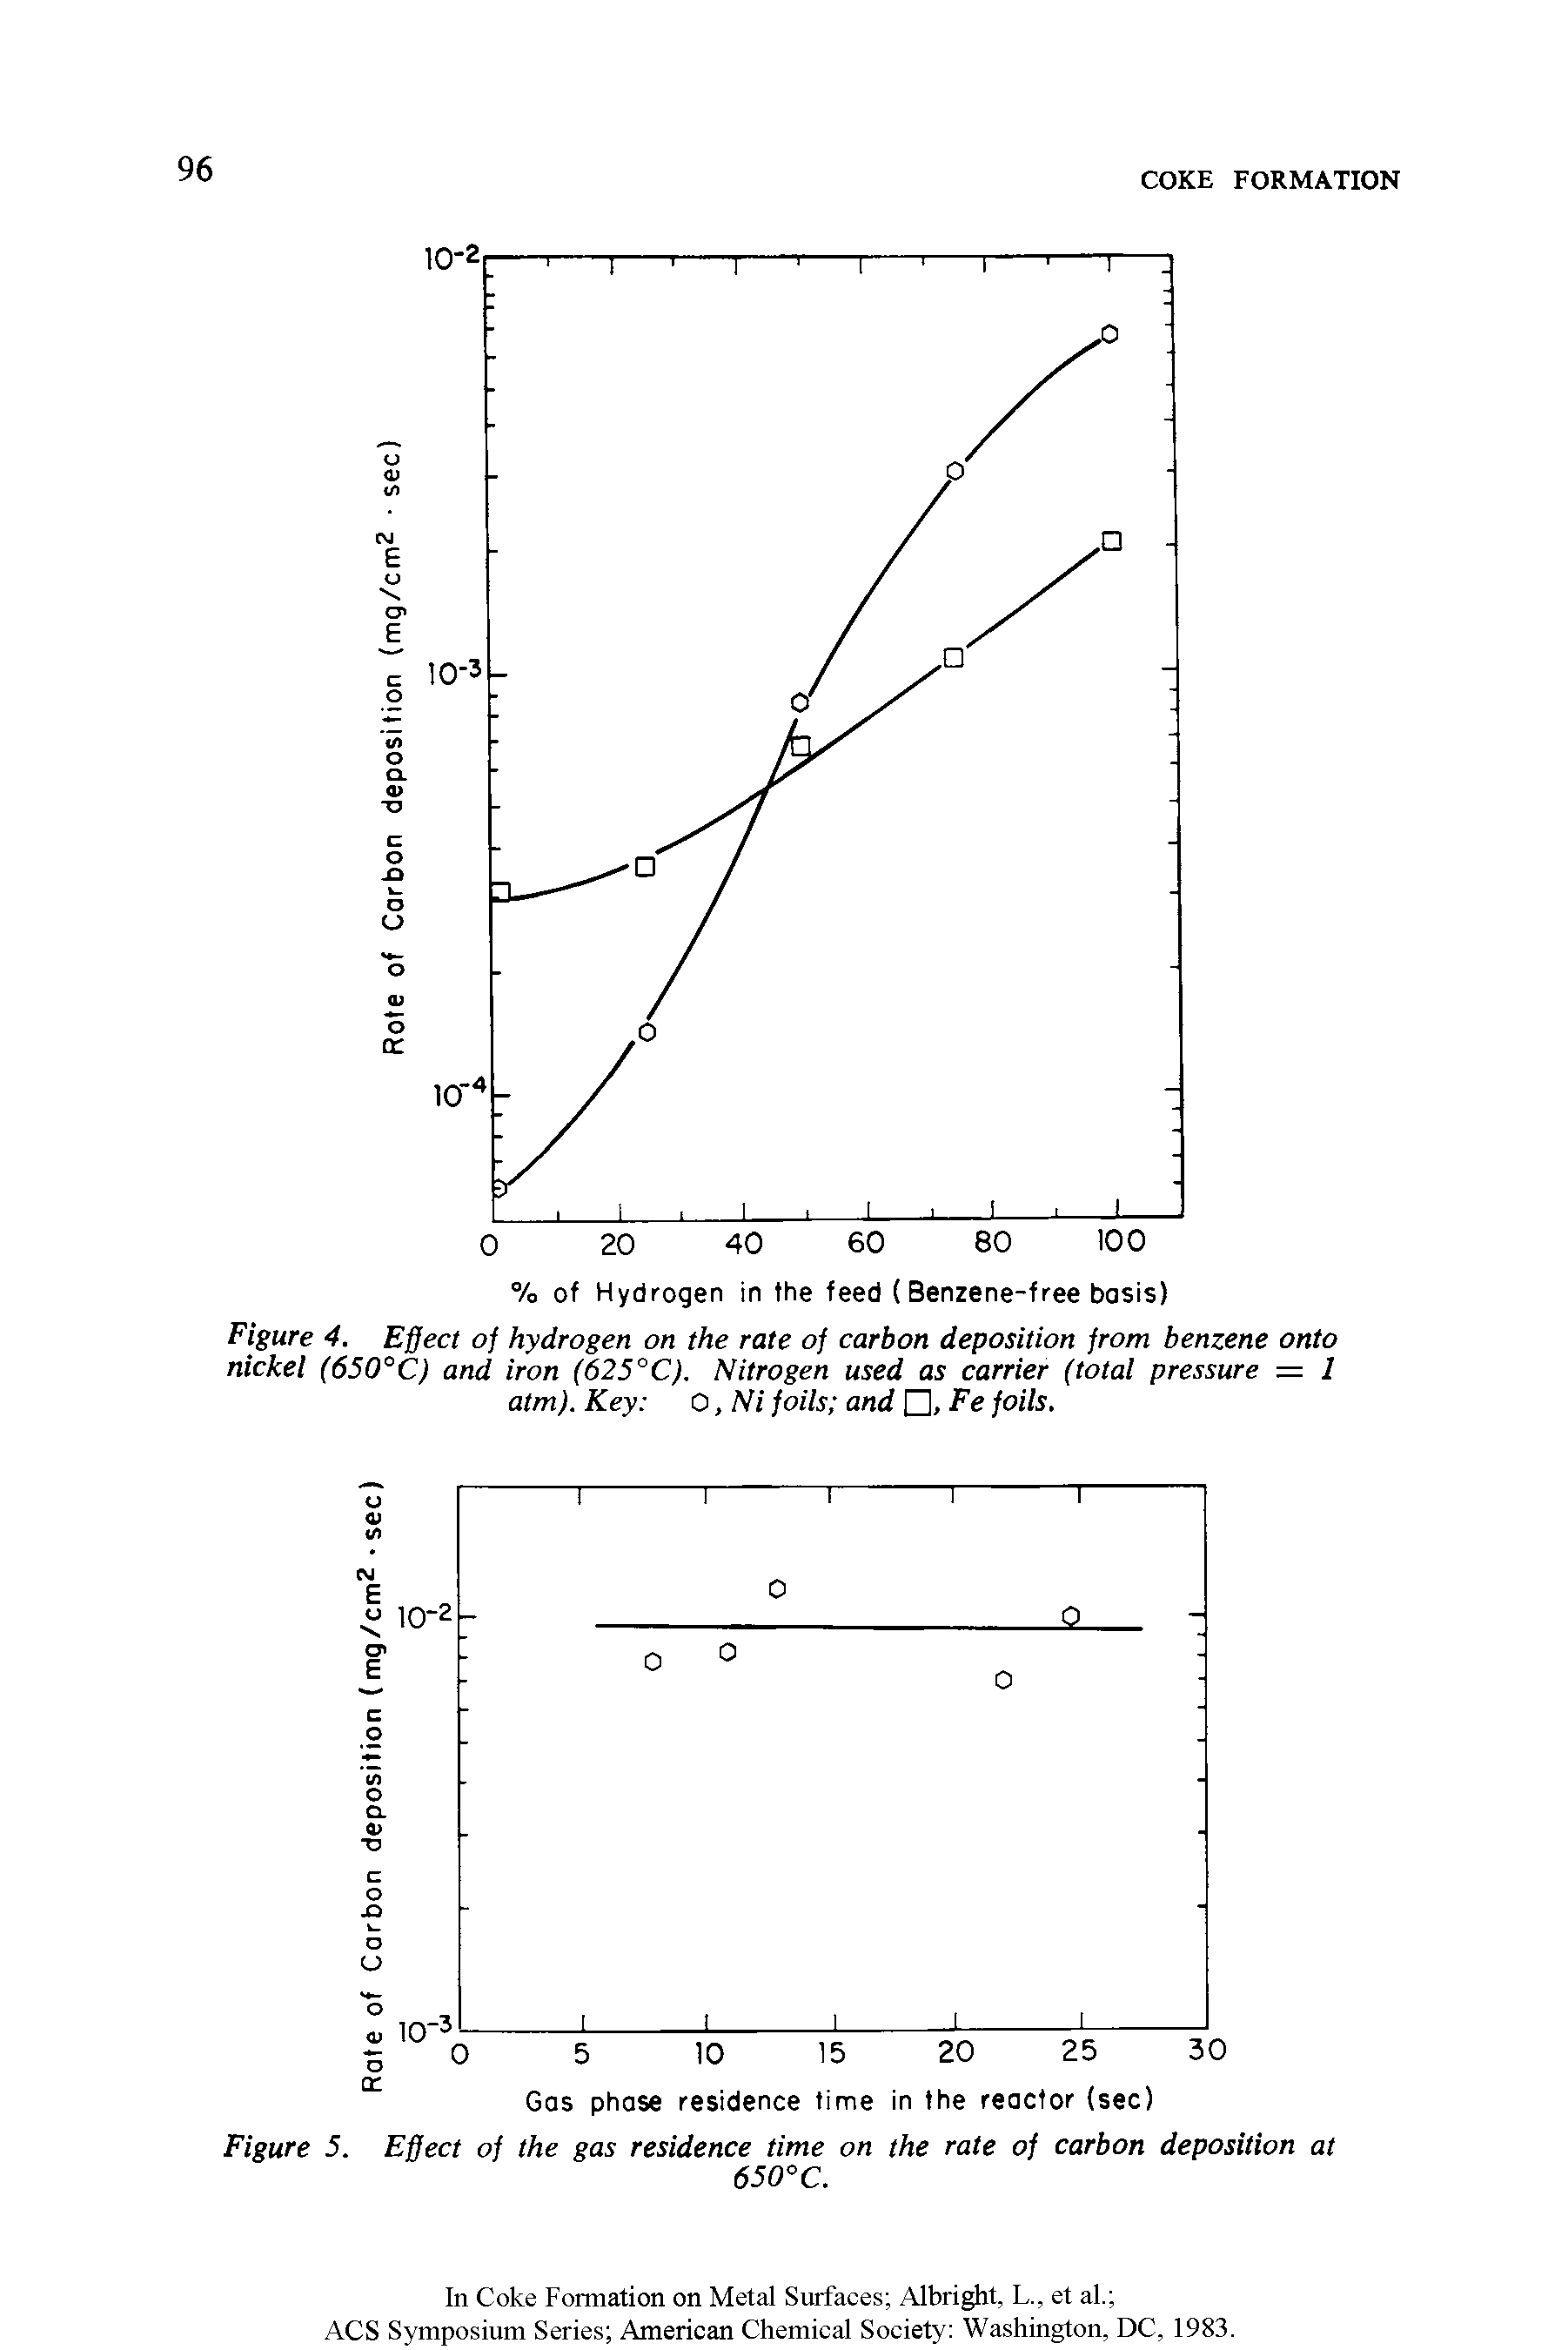 Figure 4. Effect of hydrogen on the rate of carbon deposition from benzene onto nickel (650°C) and iron (625°C). Nitrogen used as carrier (total pressure — 1 atm). Key 0, Ni foils and , Fe foils.